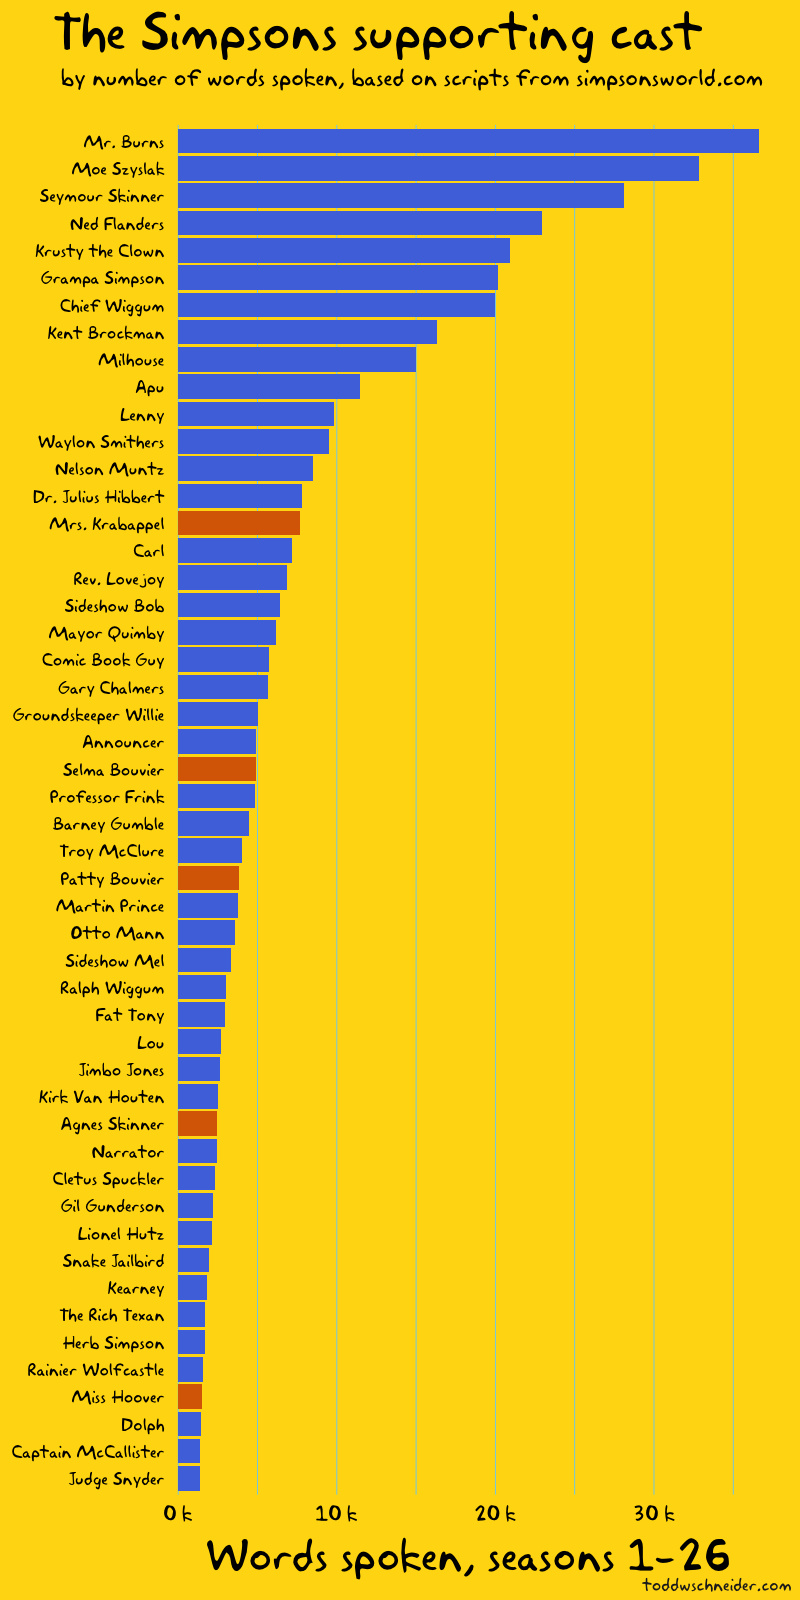 Supporting characters on The Simpsons who have spoken the most words in the show's history